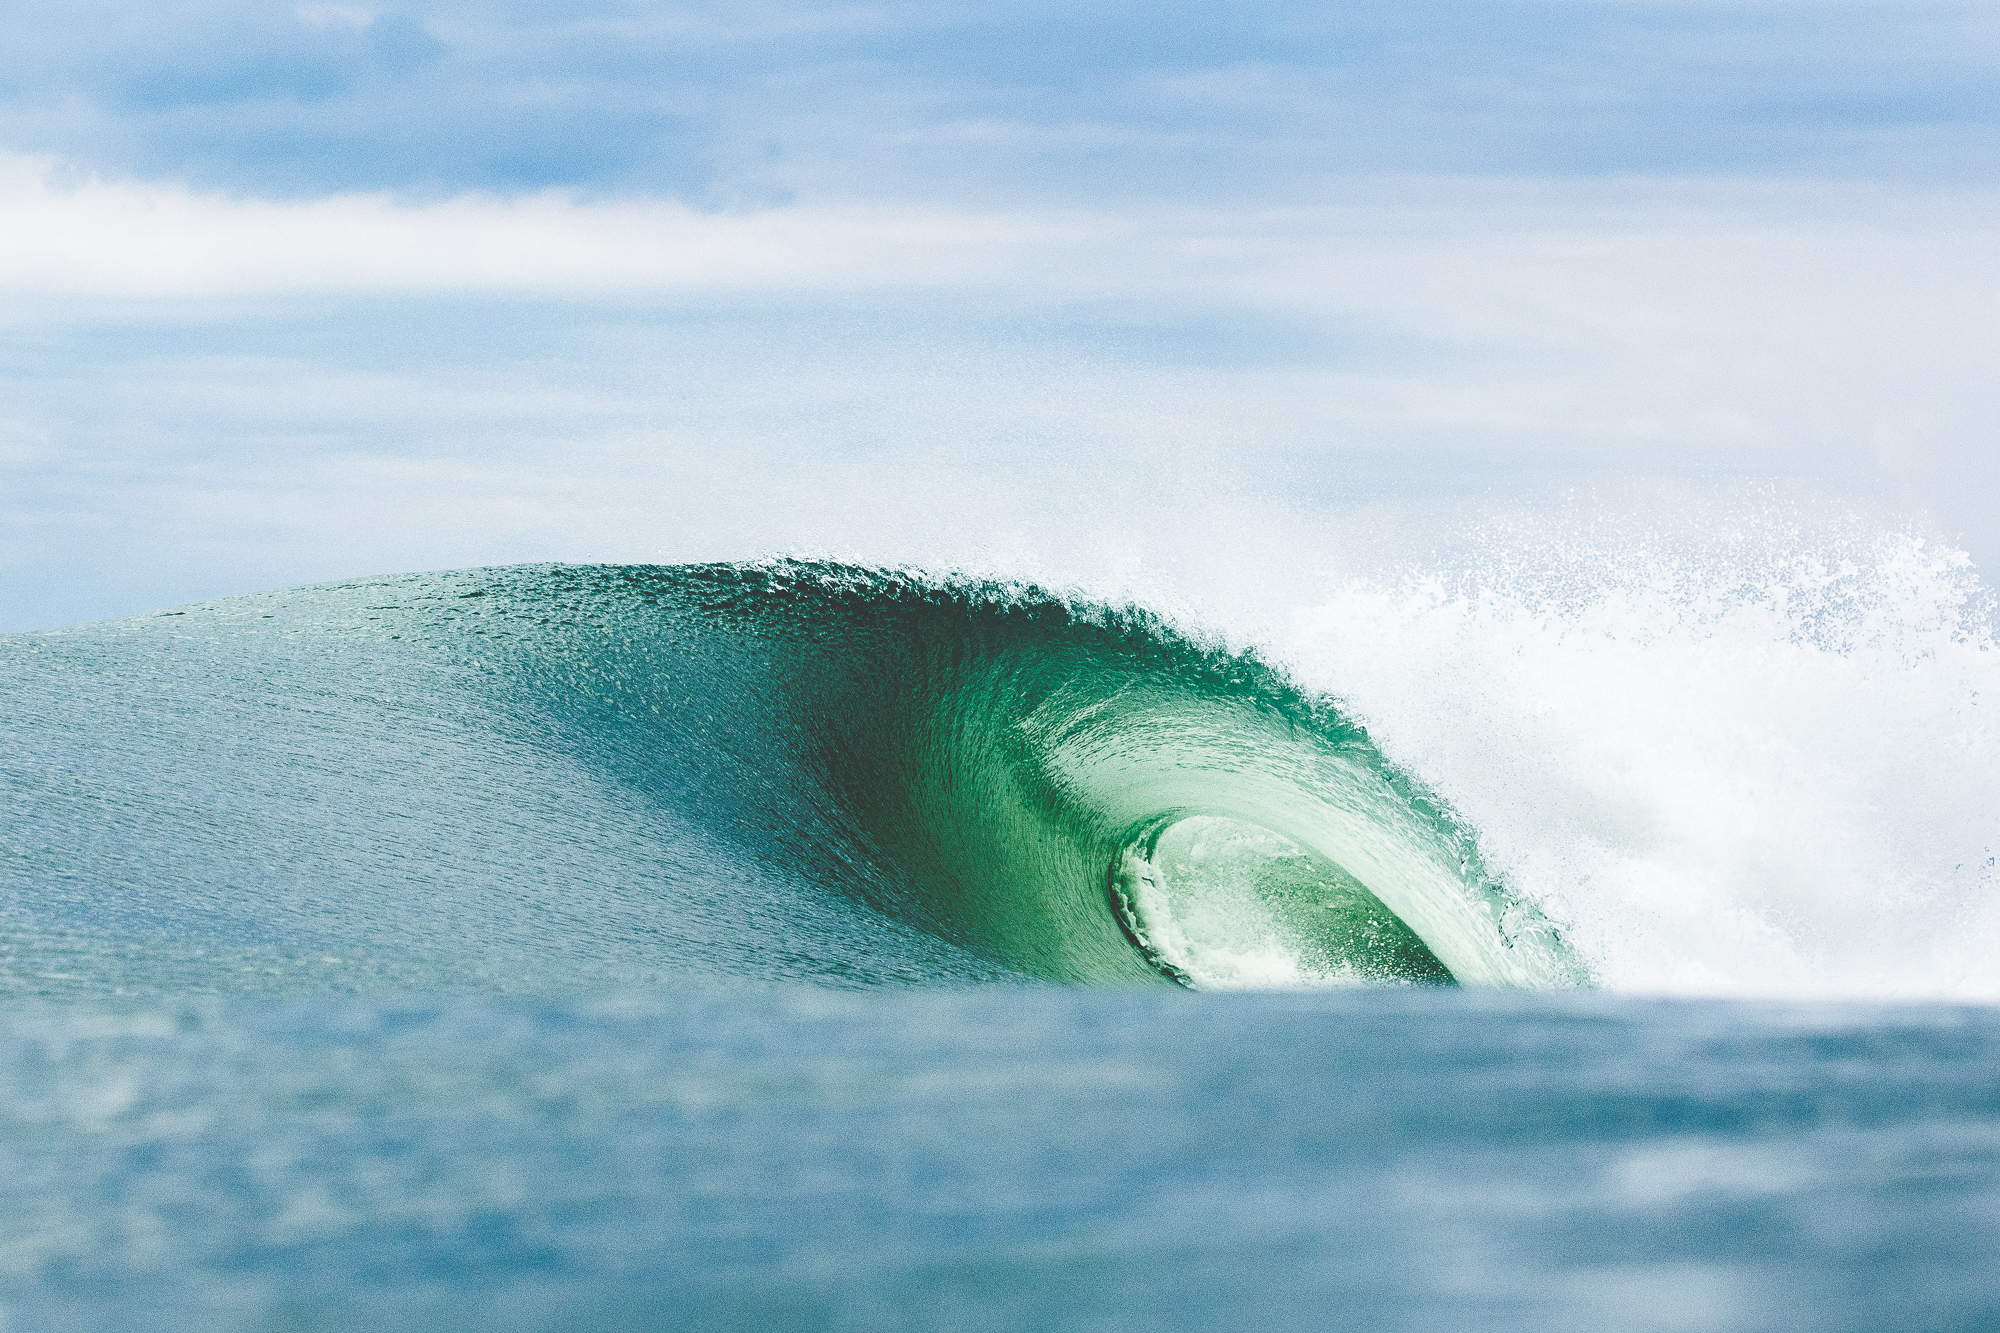 What inspires you Barrels are always a good source of inspiration Guarda do Embau Brazil Foto William Zimmermann